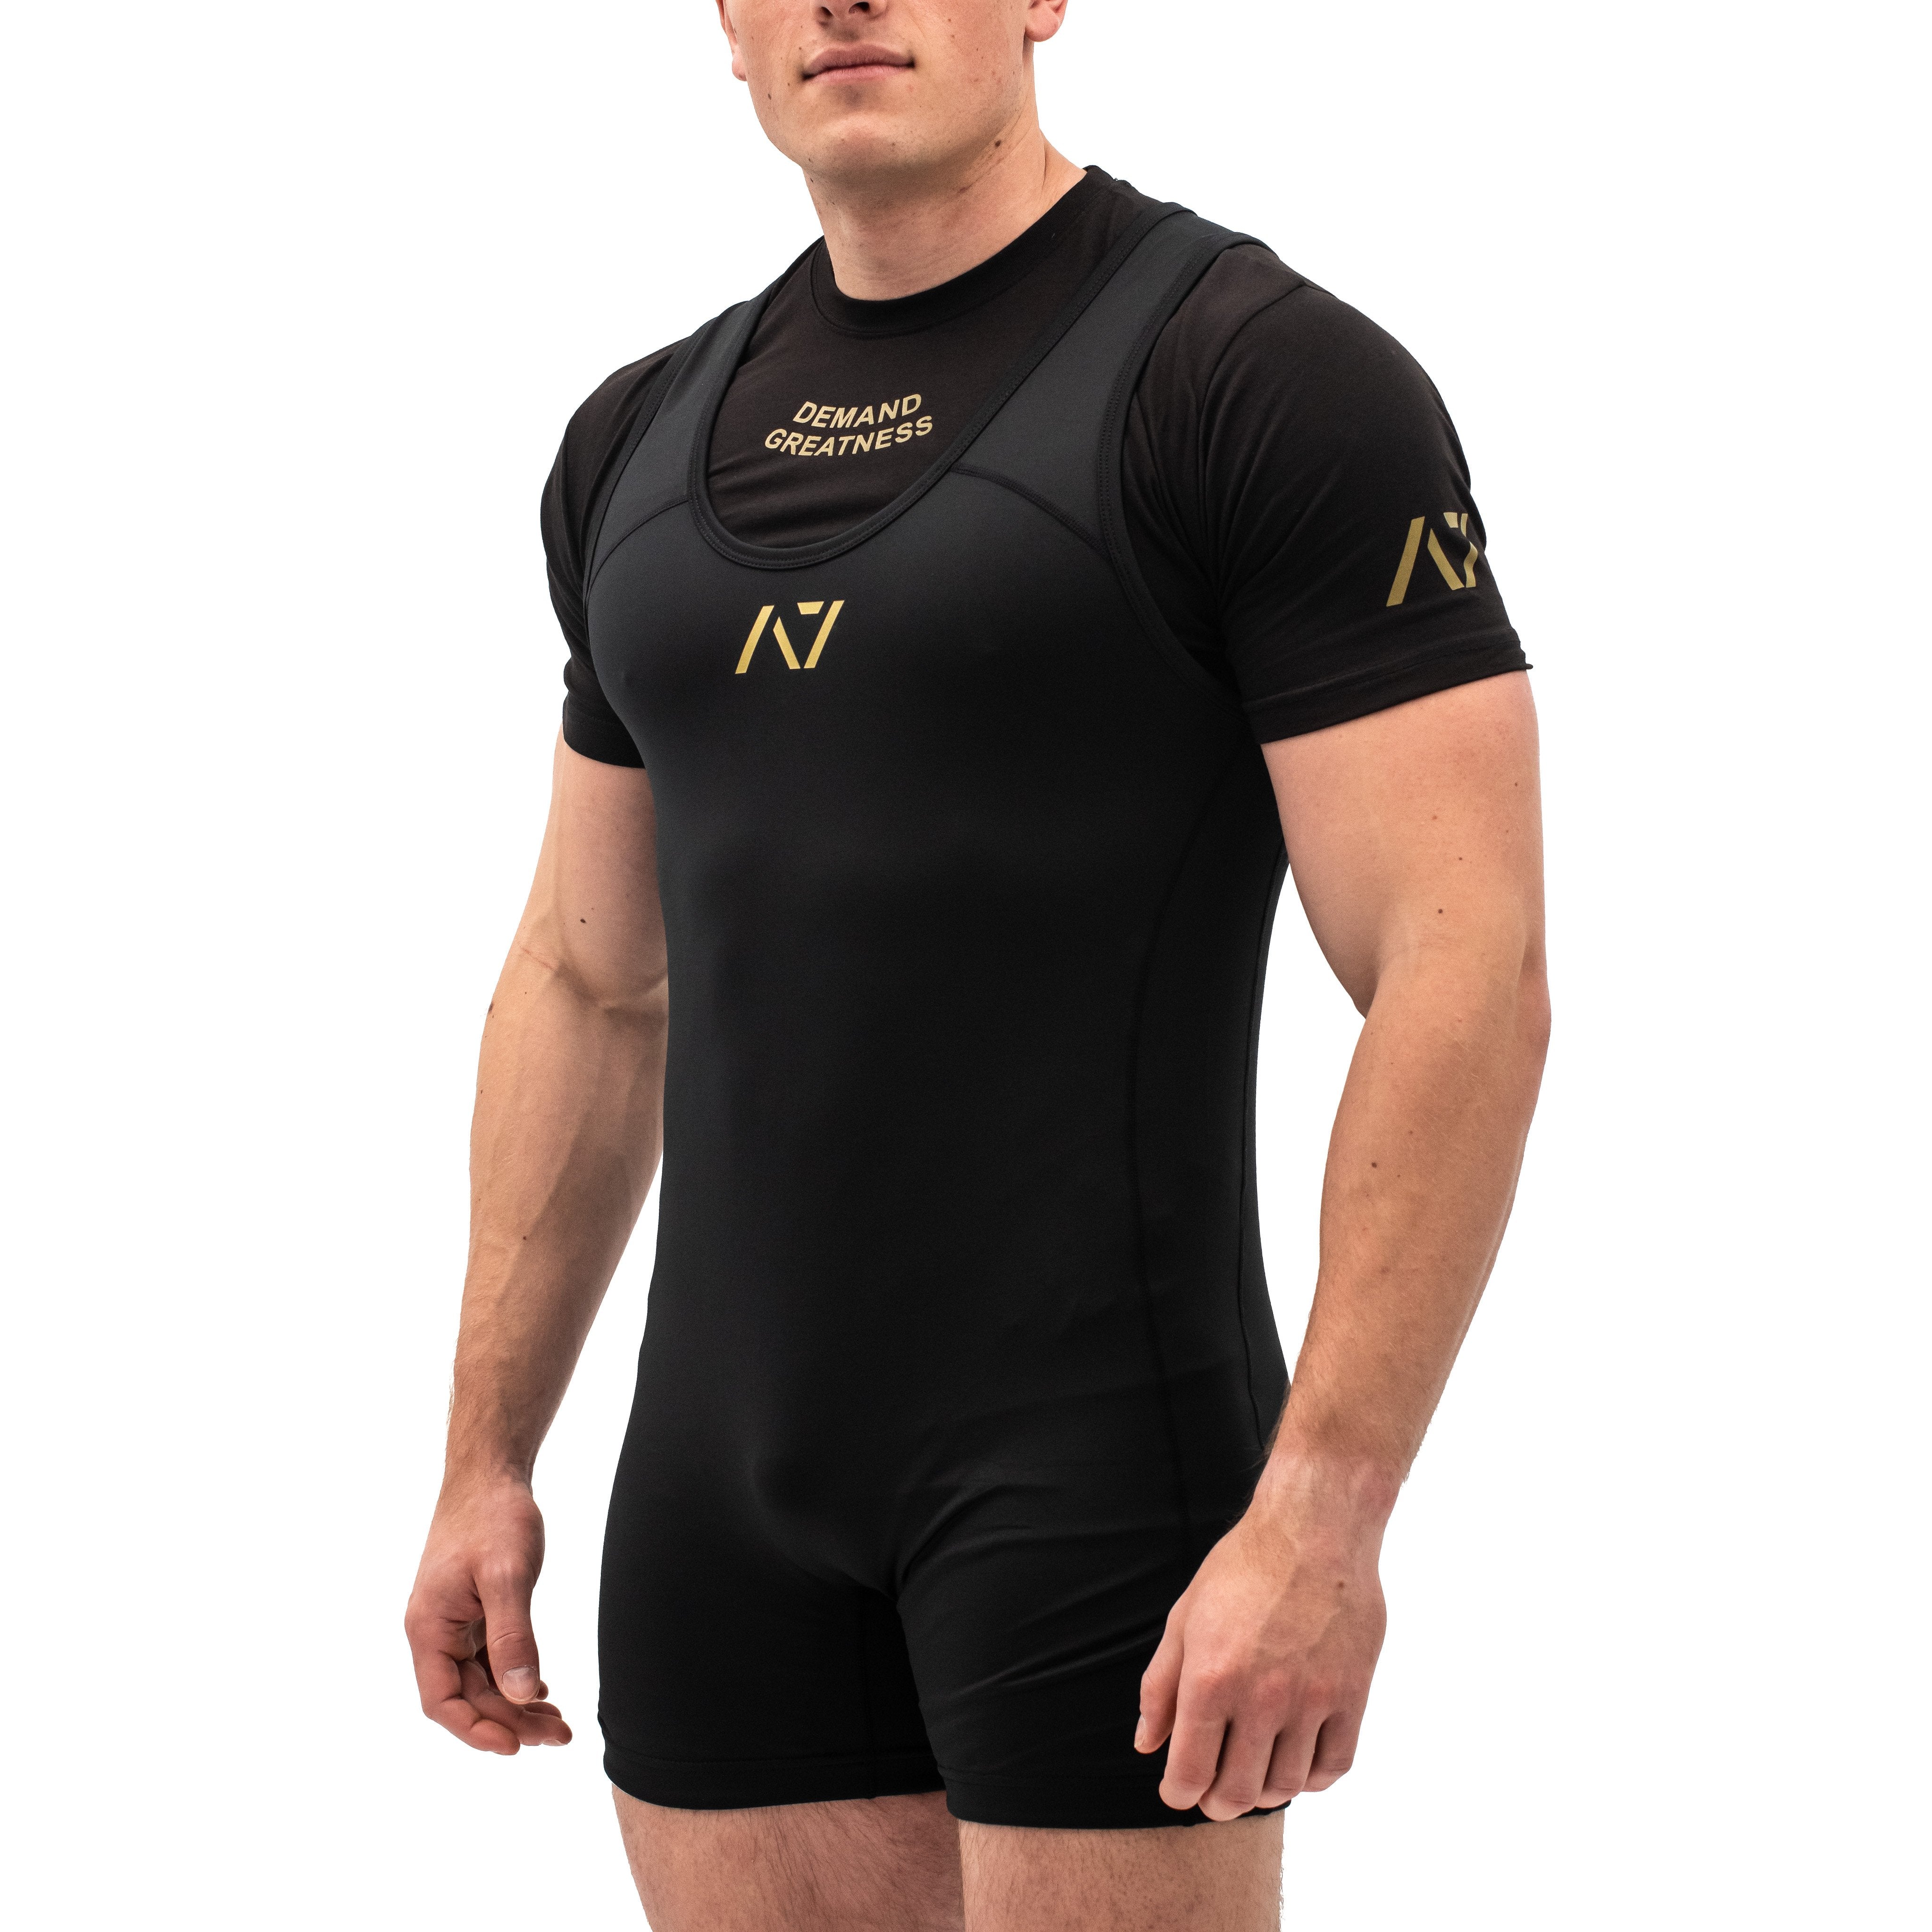 Ox Men's Compression Pants - Chromium  A7 Europe shipping to EU – A7 EUROPE